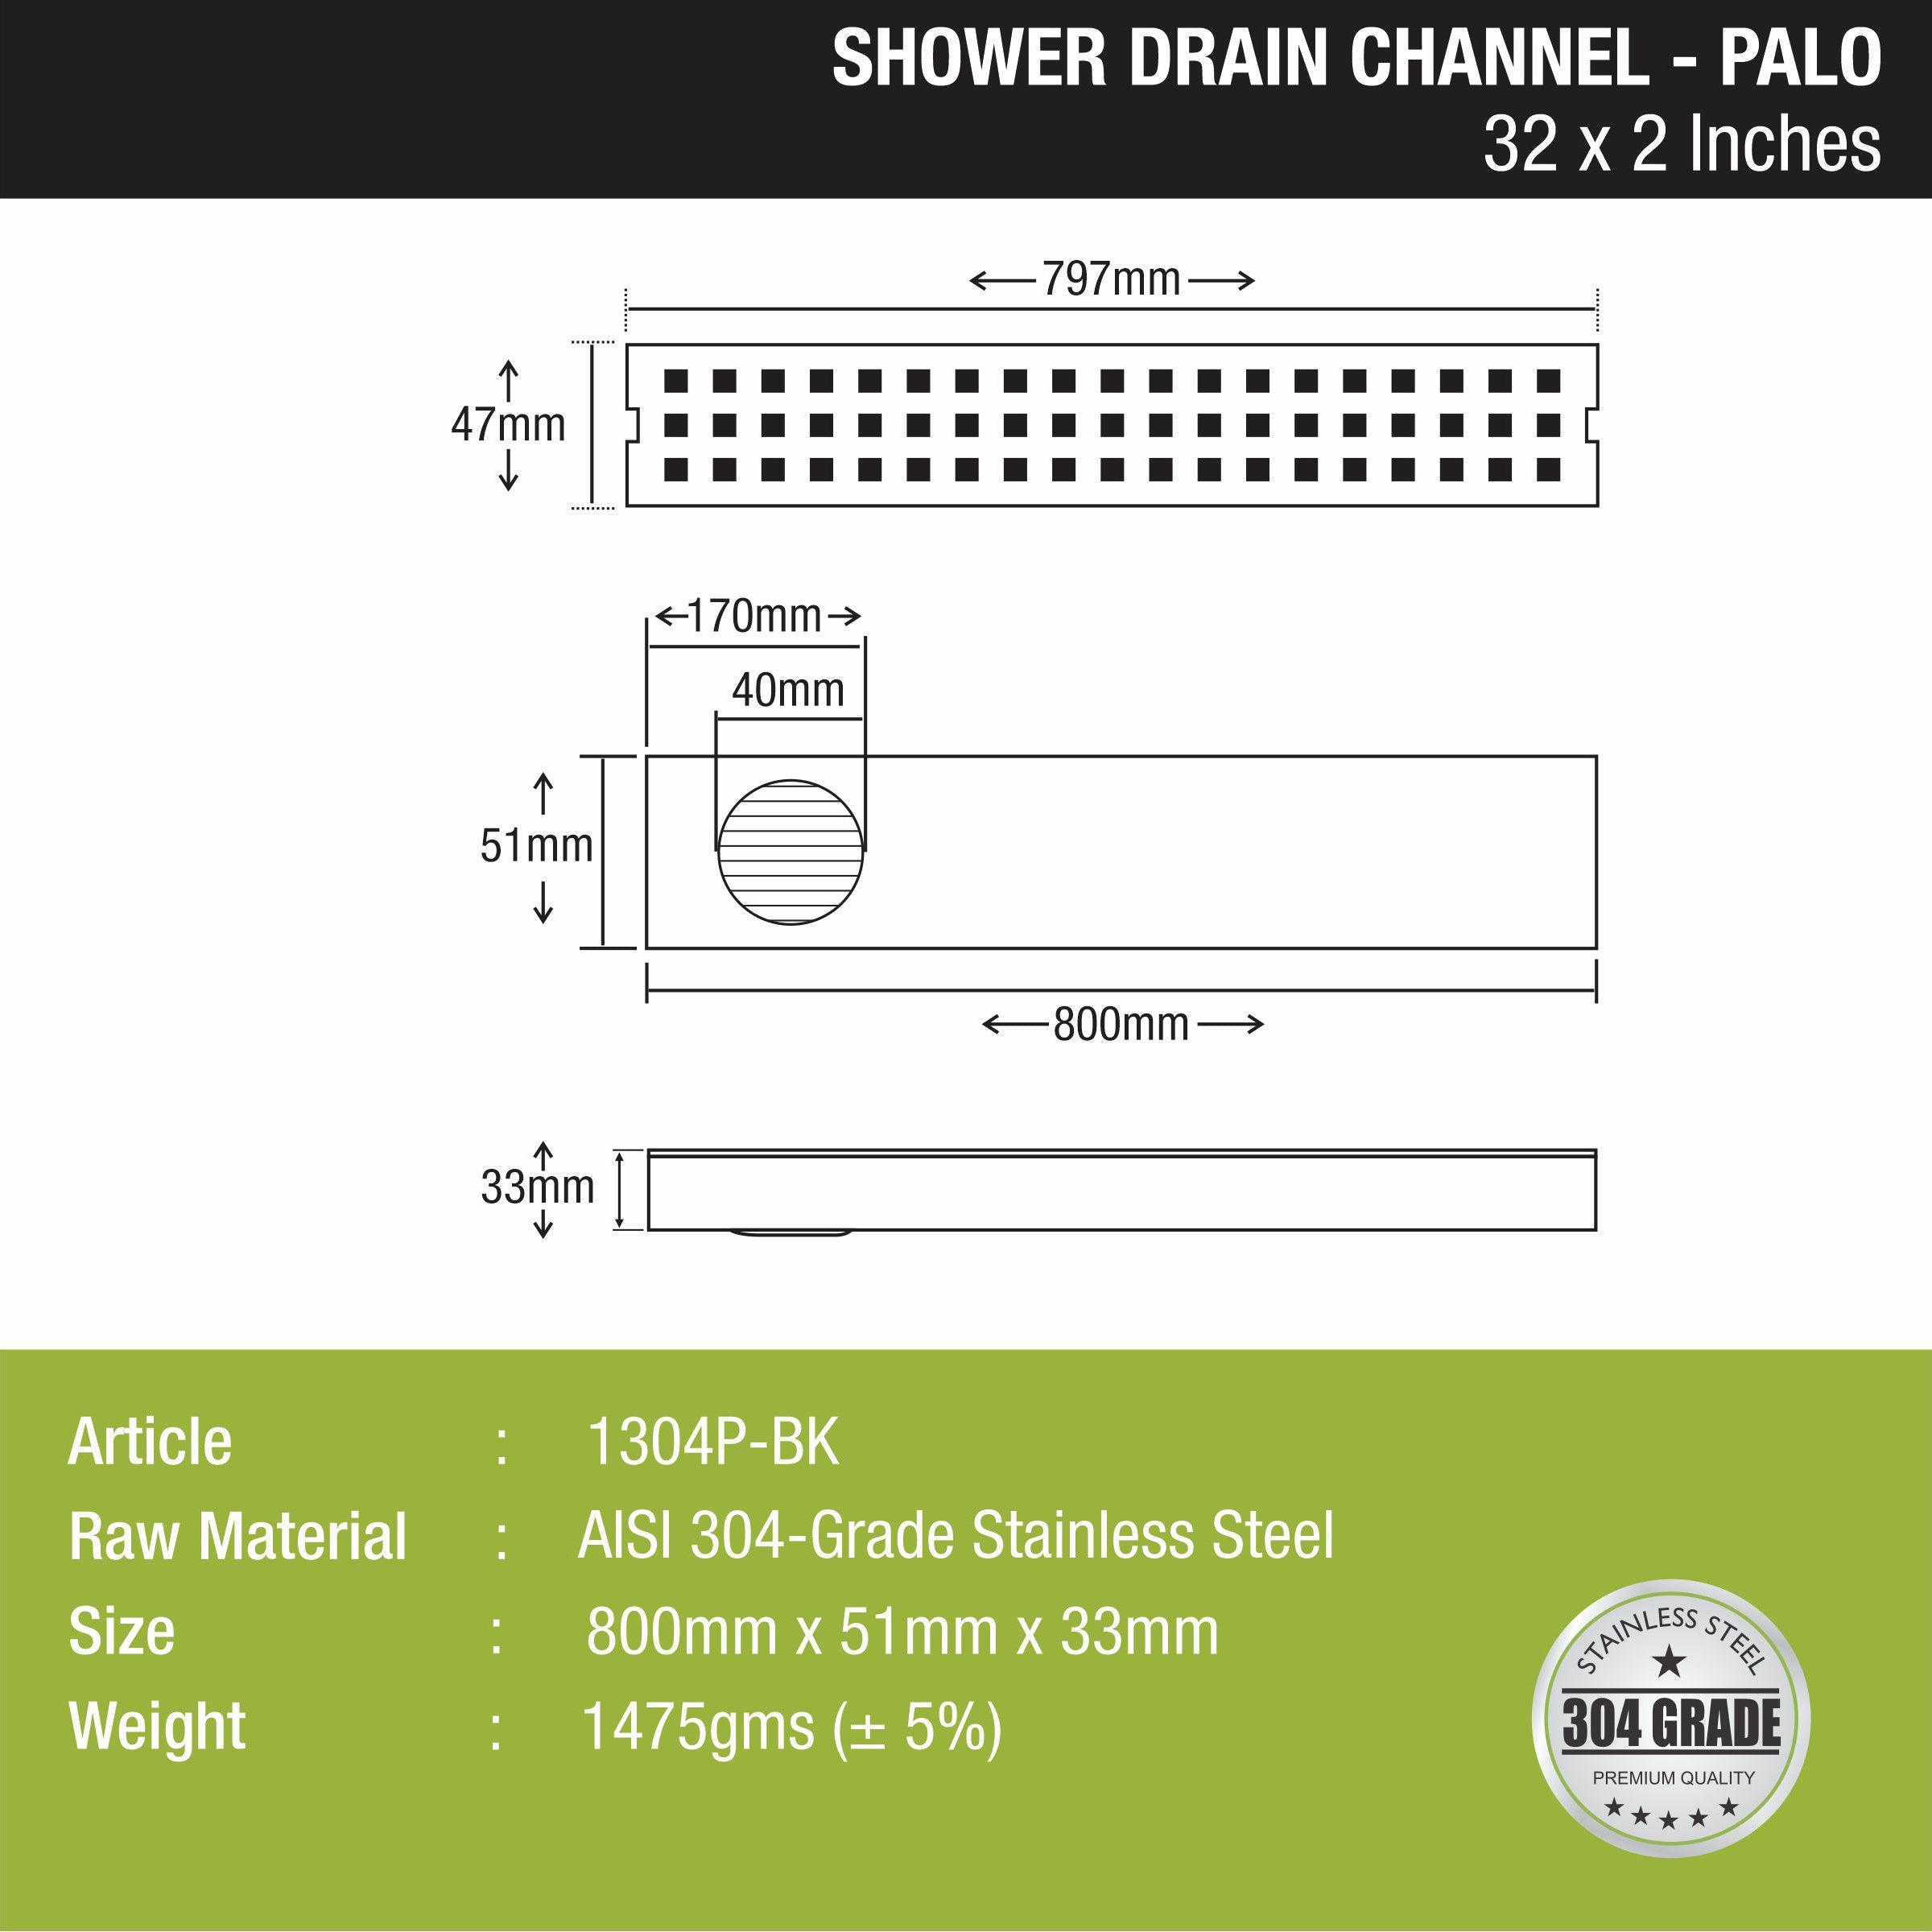 Palo Shower Drain Channel - Black (32 x 2 Inches) size and measurement